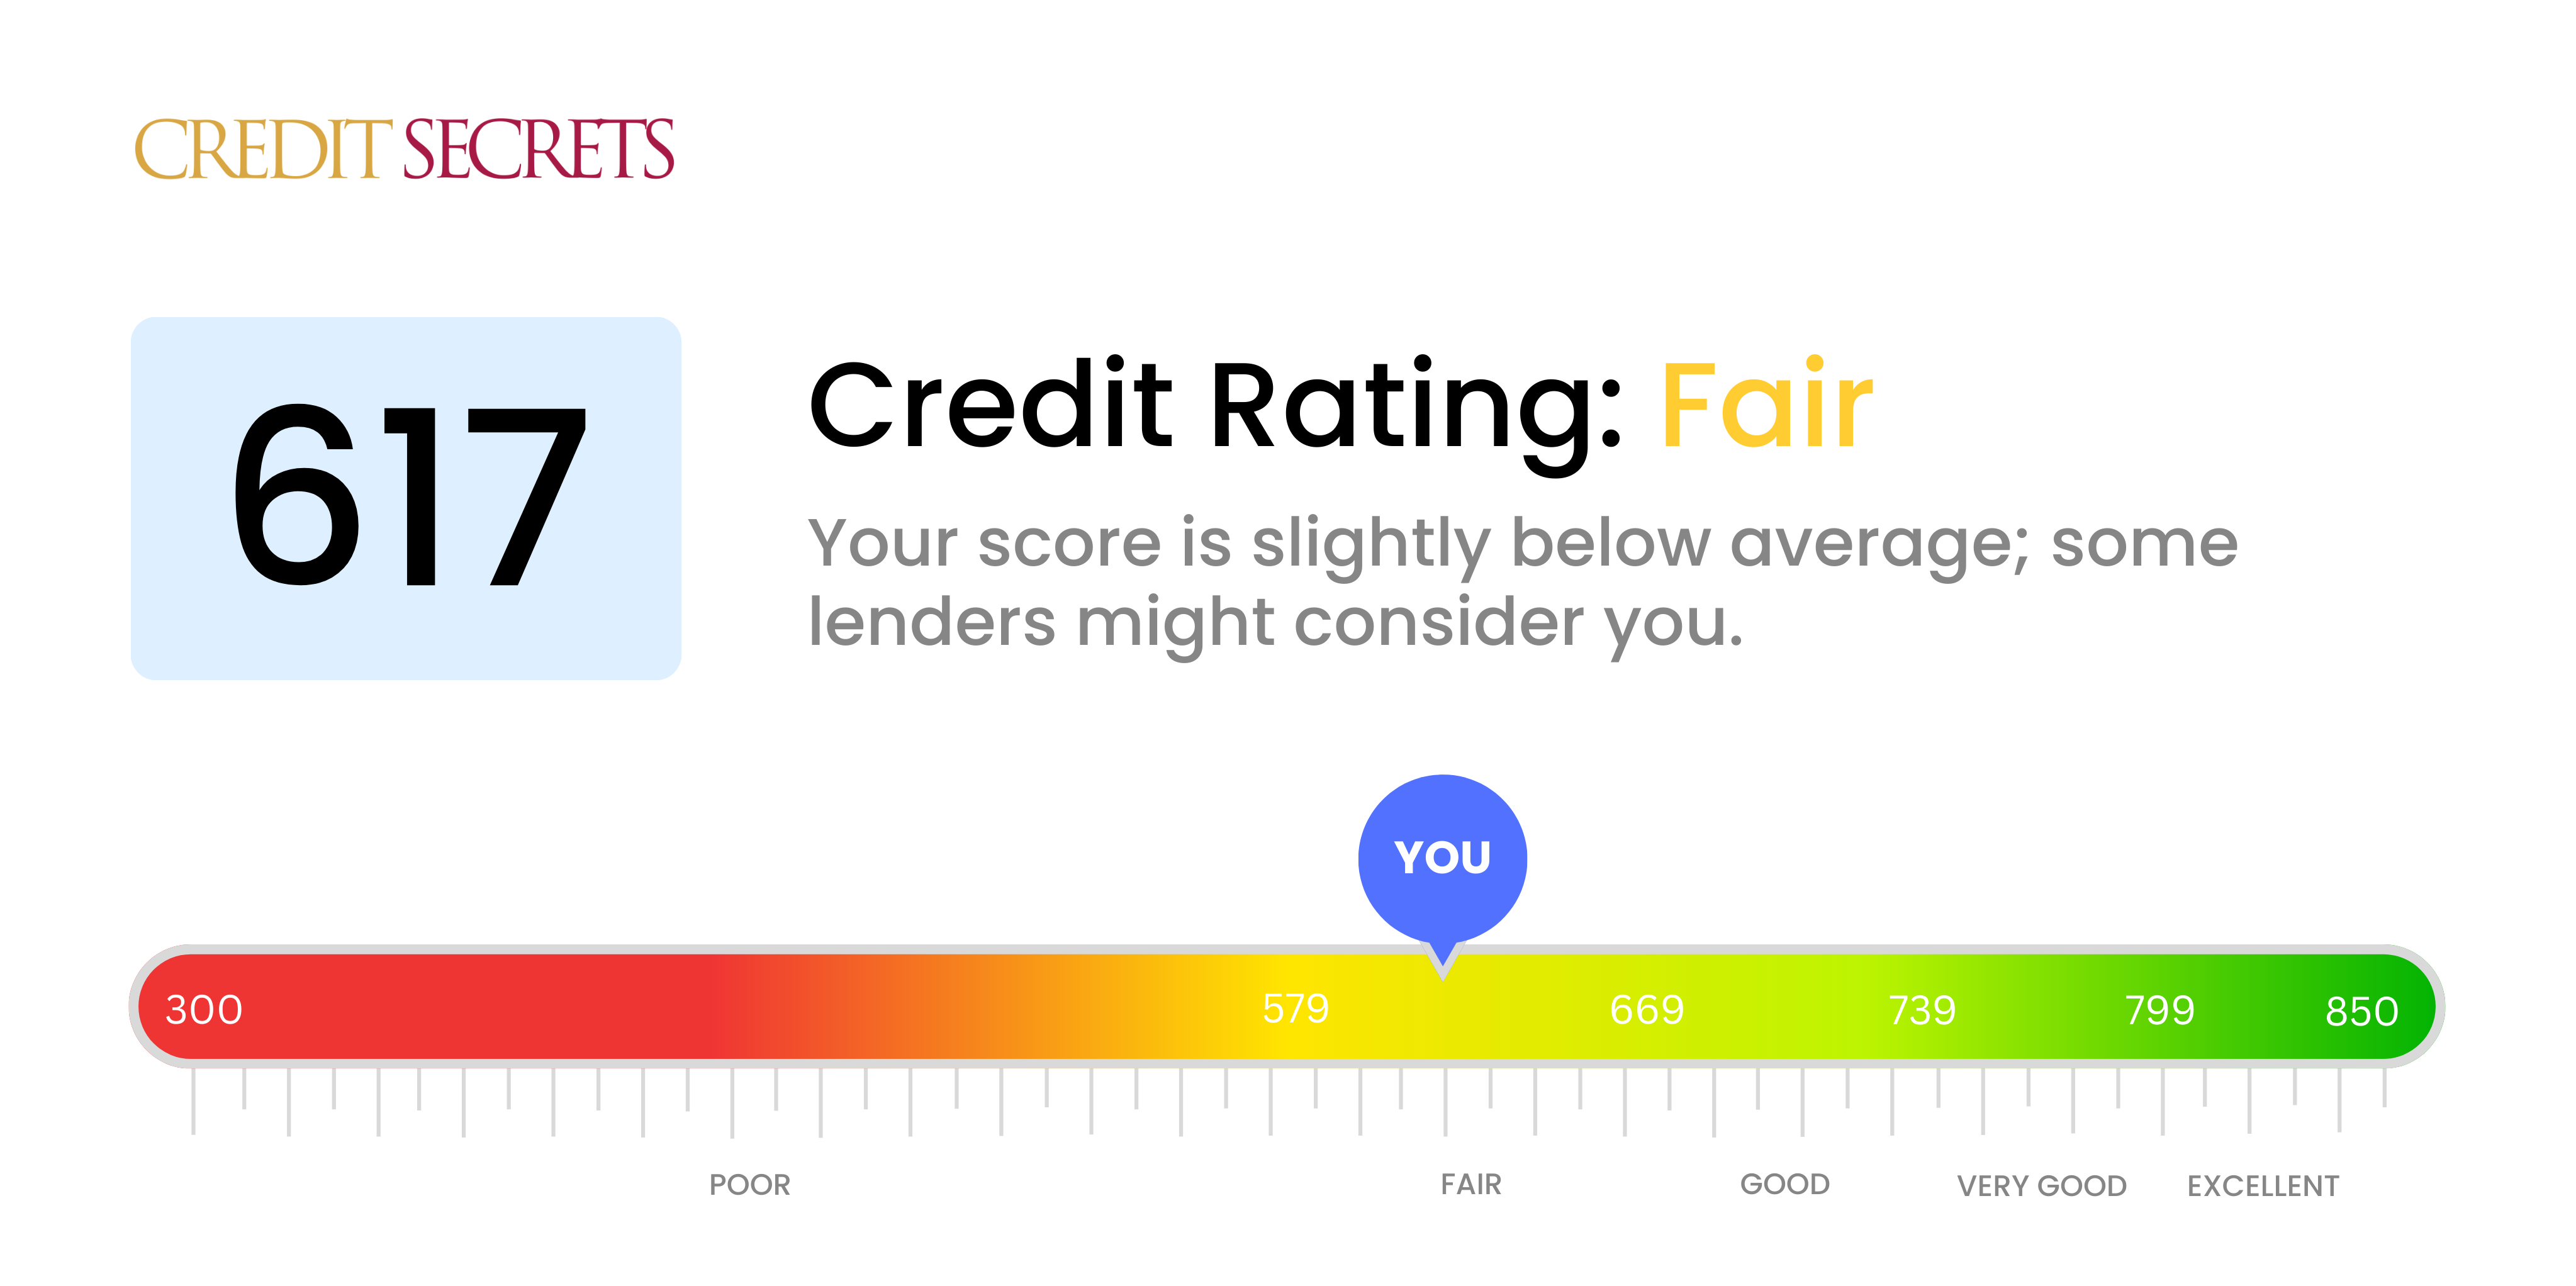 Is 617 a good credit score?